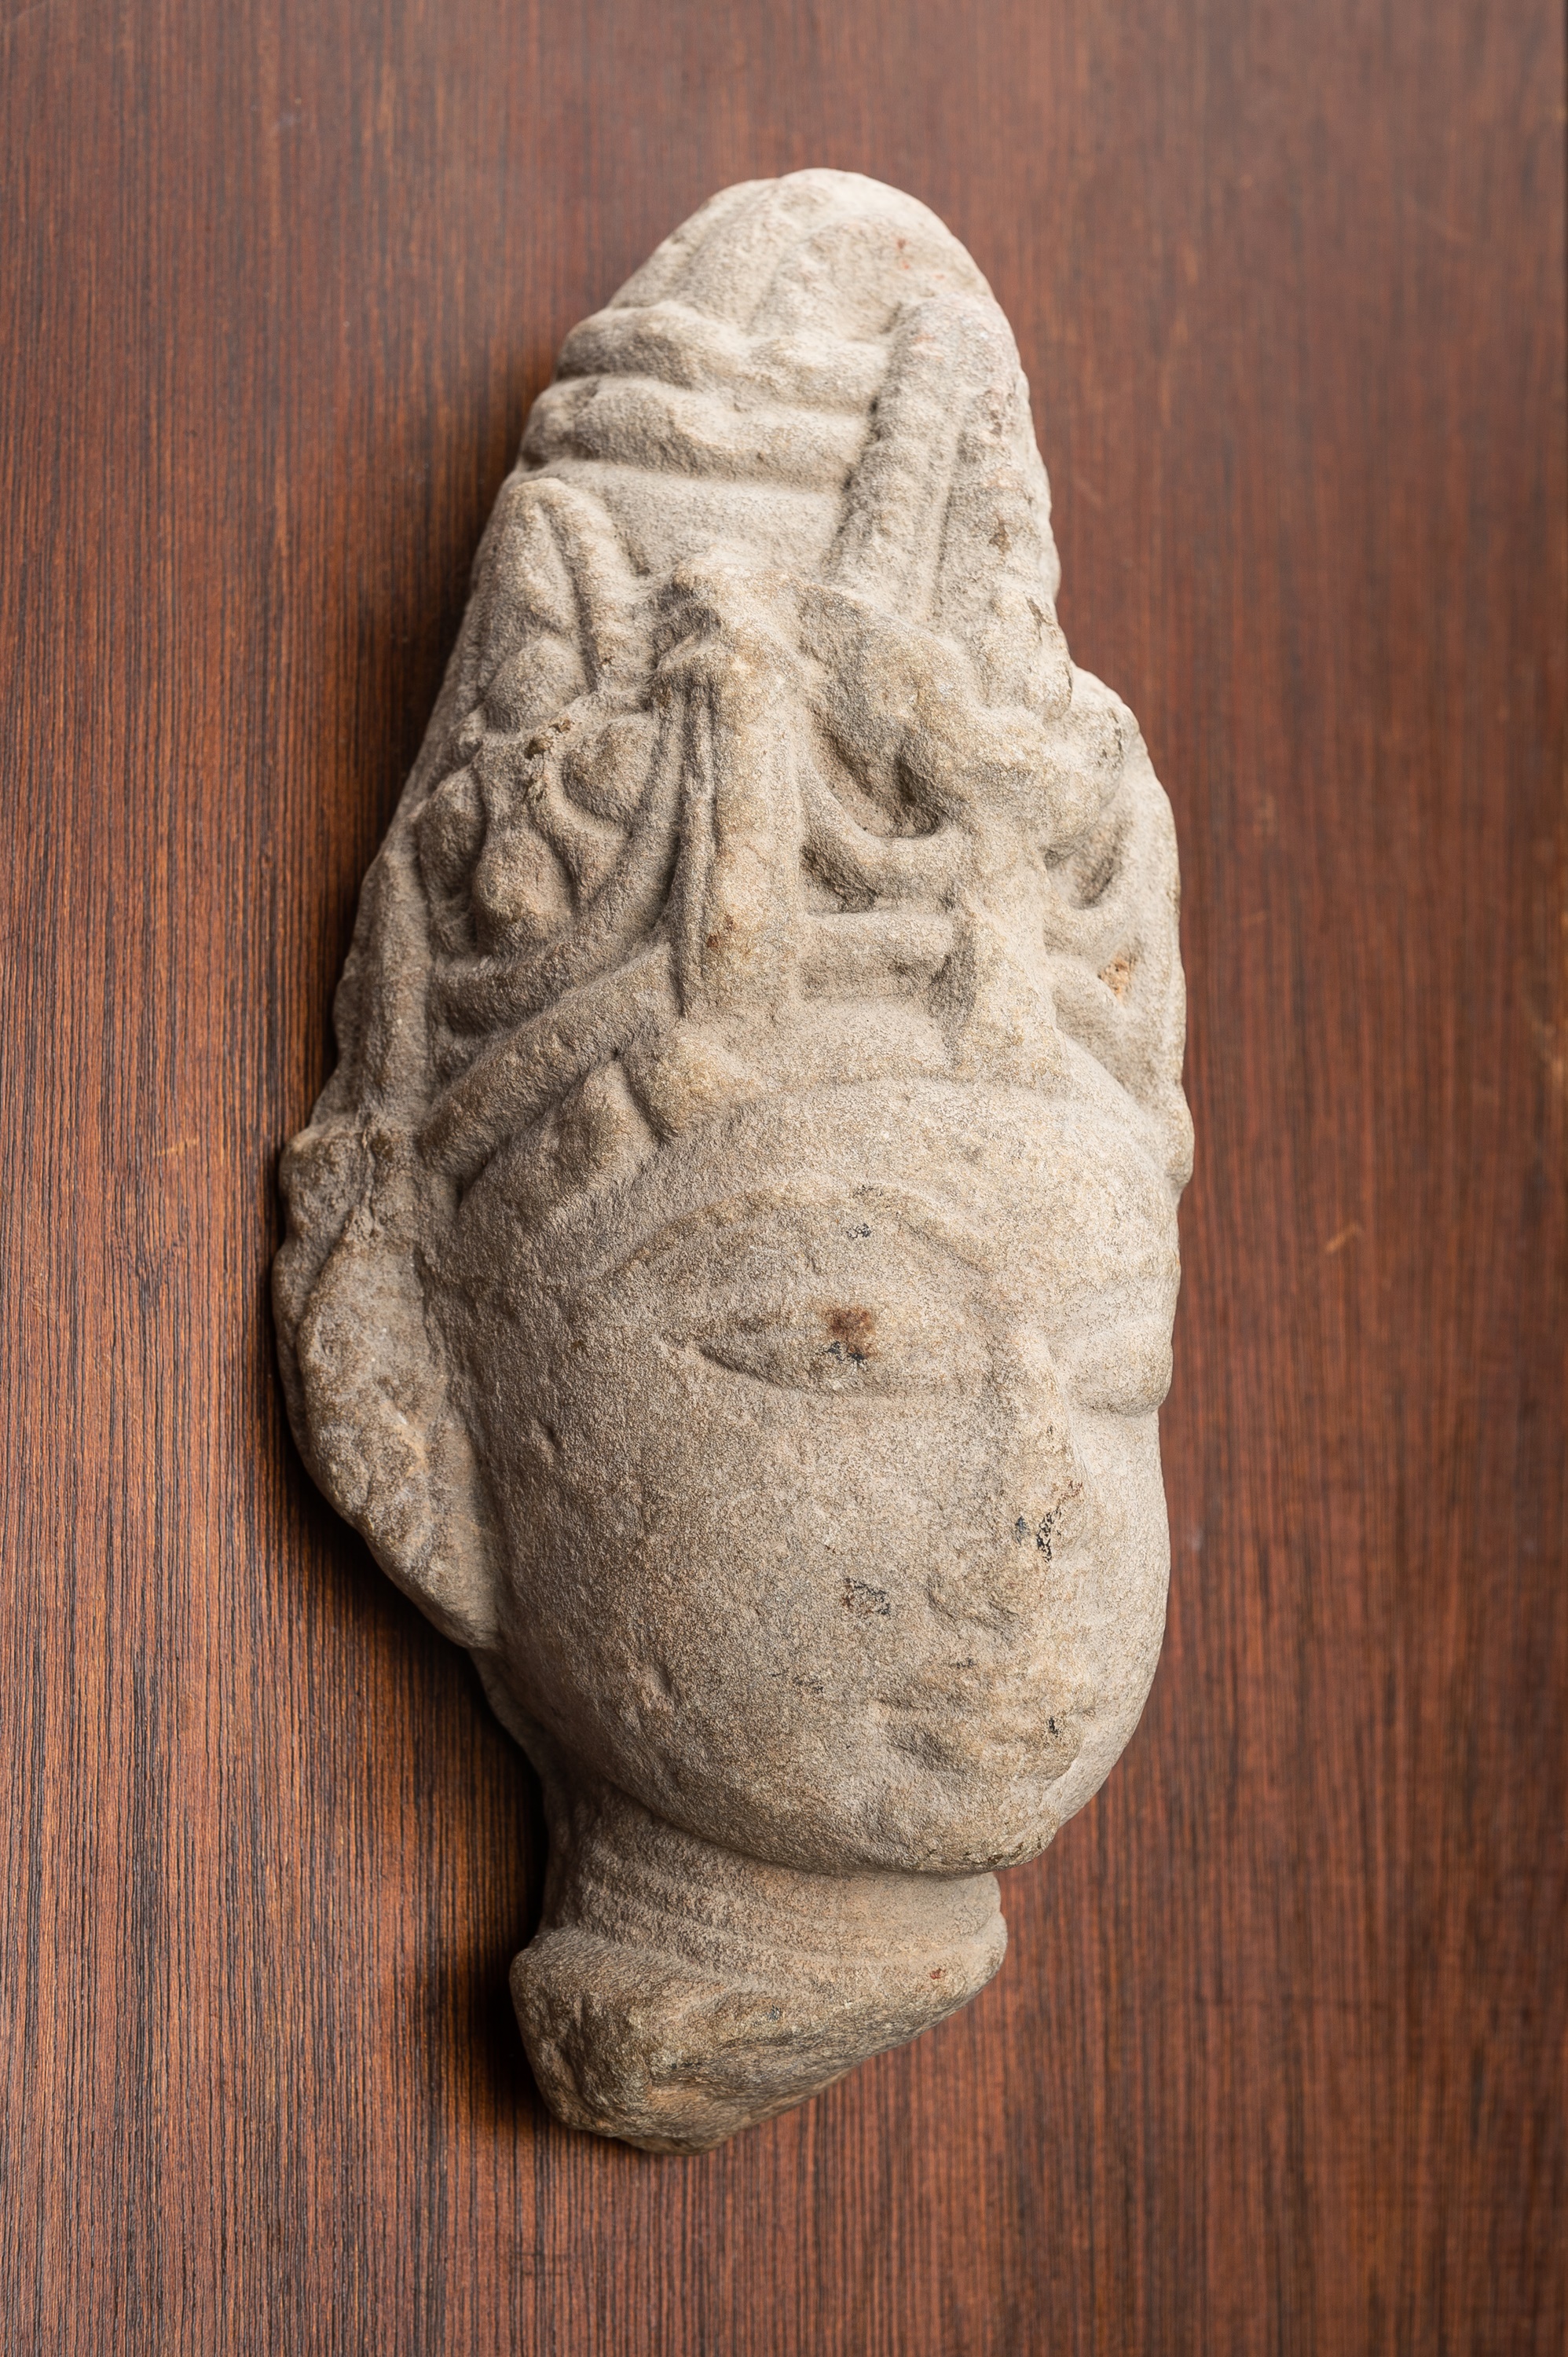 A SANDSTONE HEAD OF VISHNU WITH A MITER CROWN - Image 3 of 14